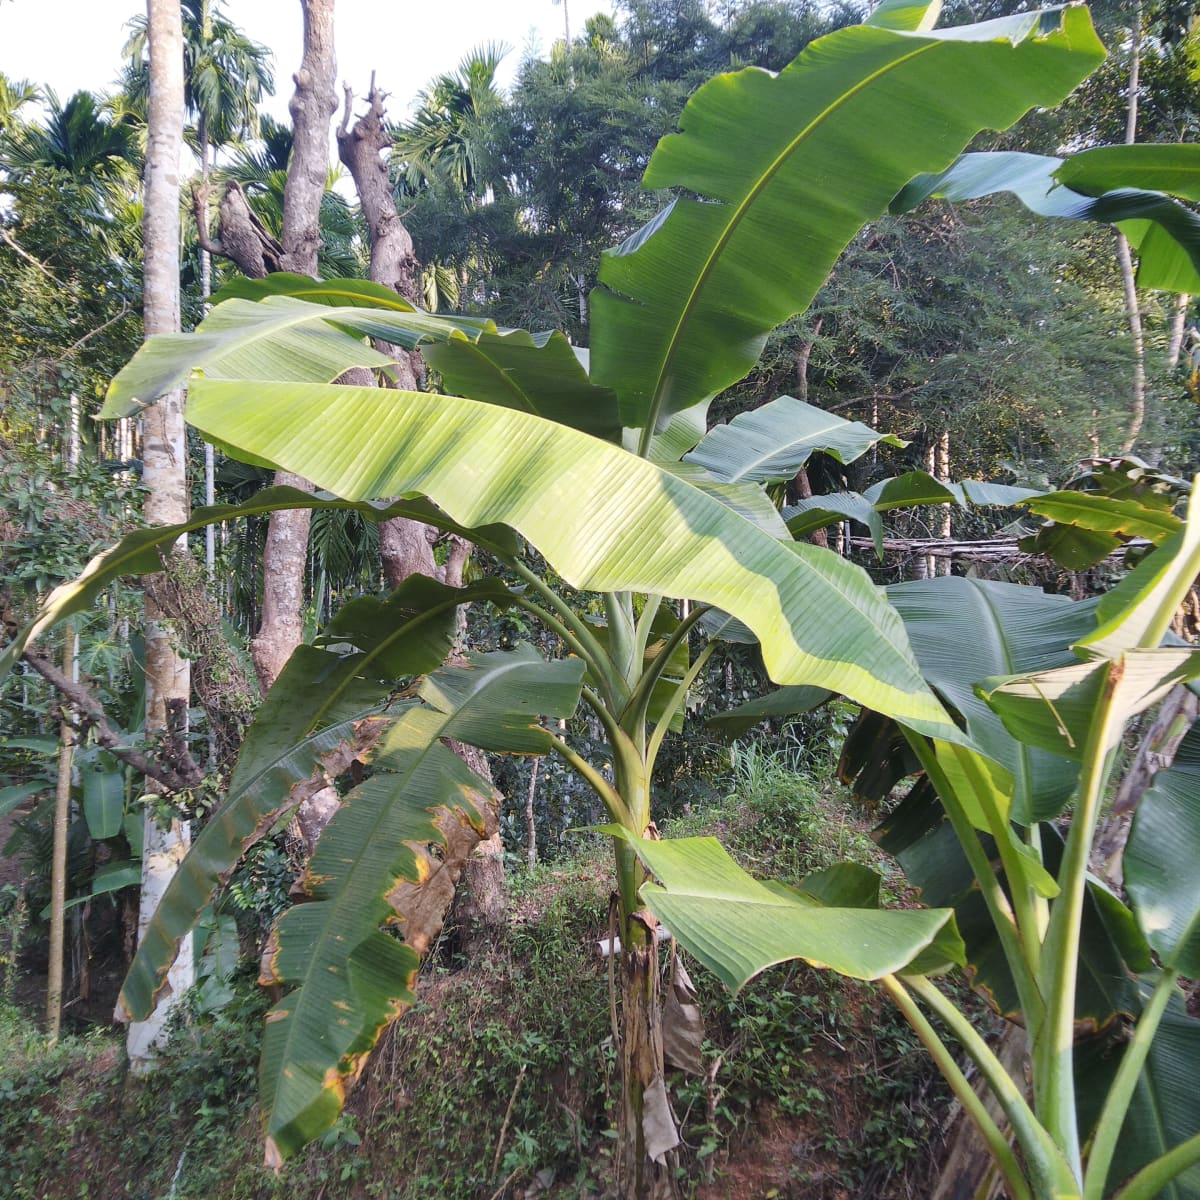 Plantain Leaves for Steam Cooking and Natural Taste - HubPages